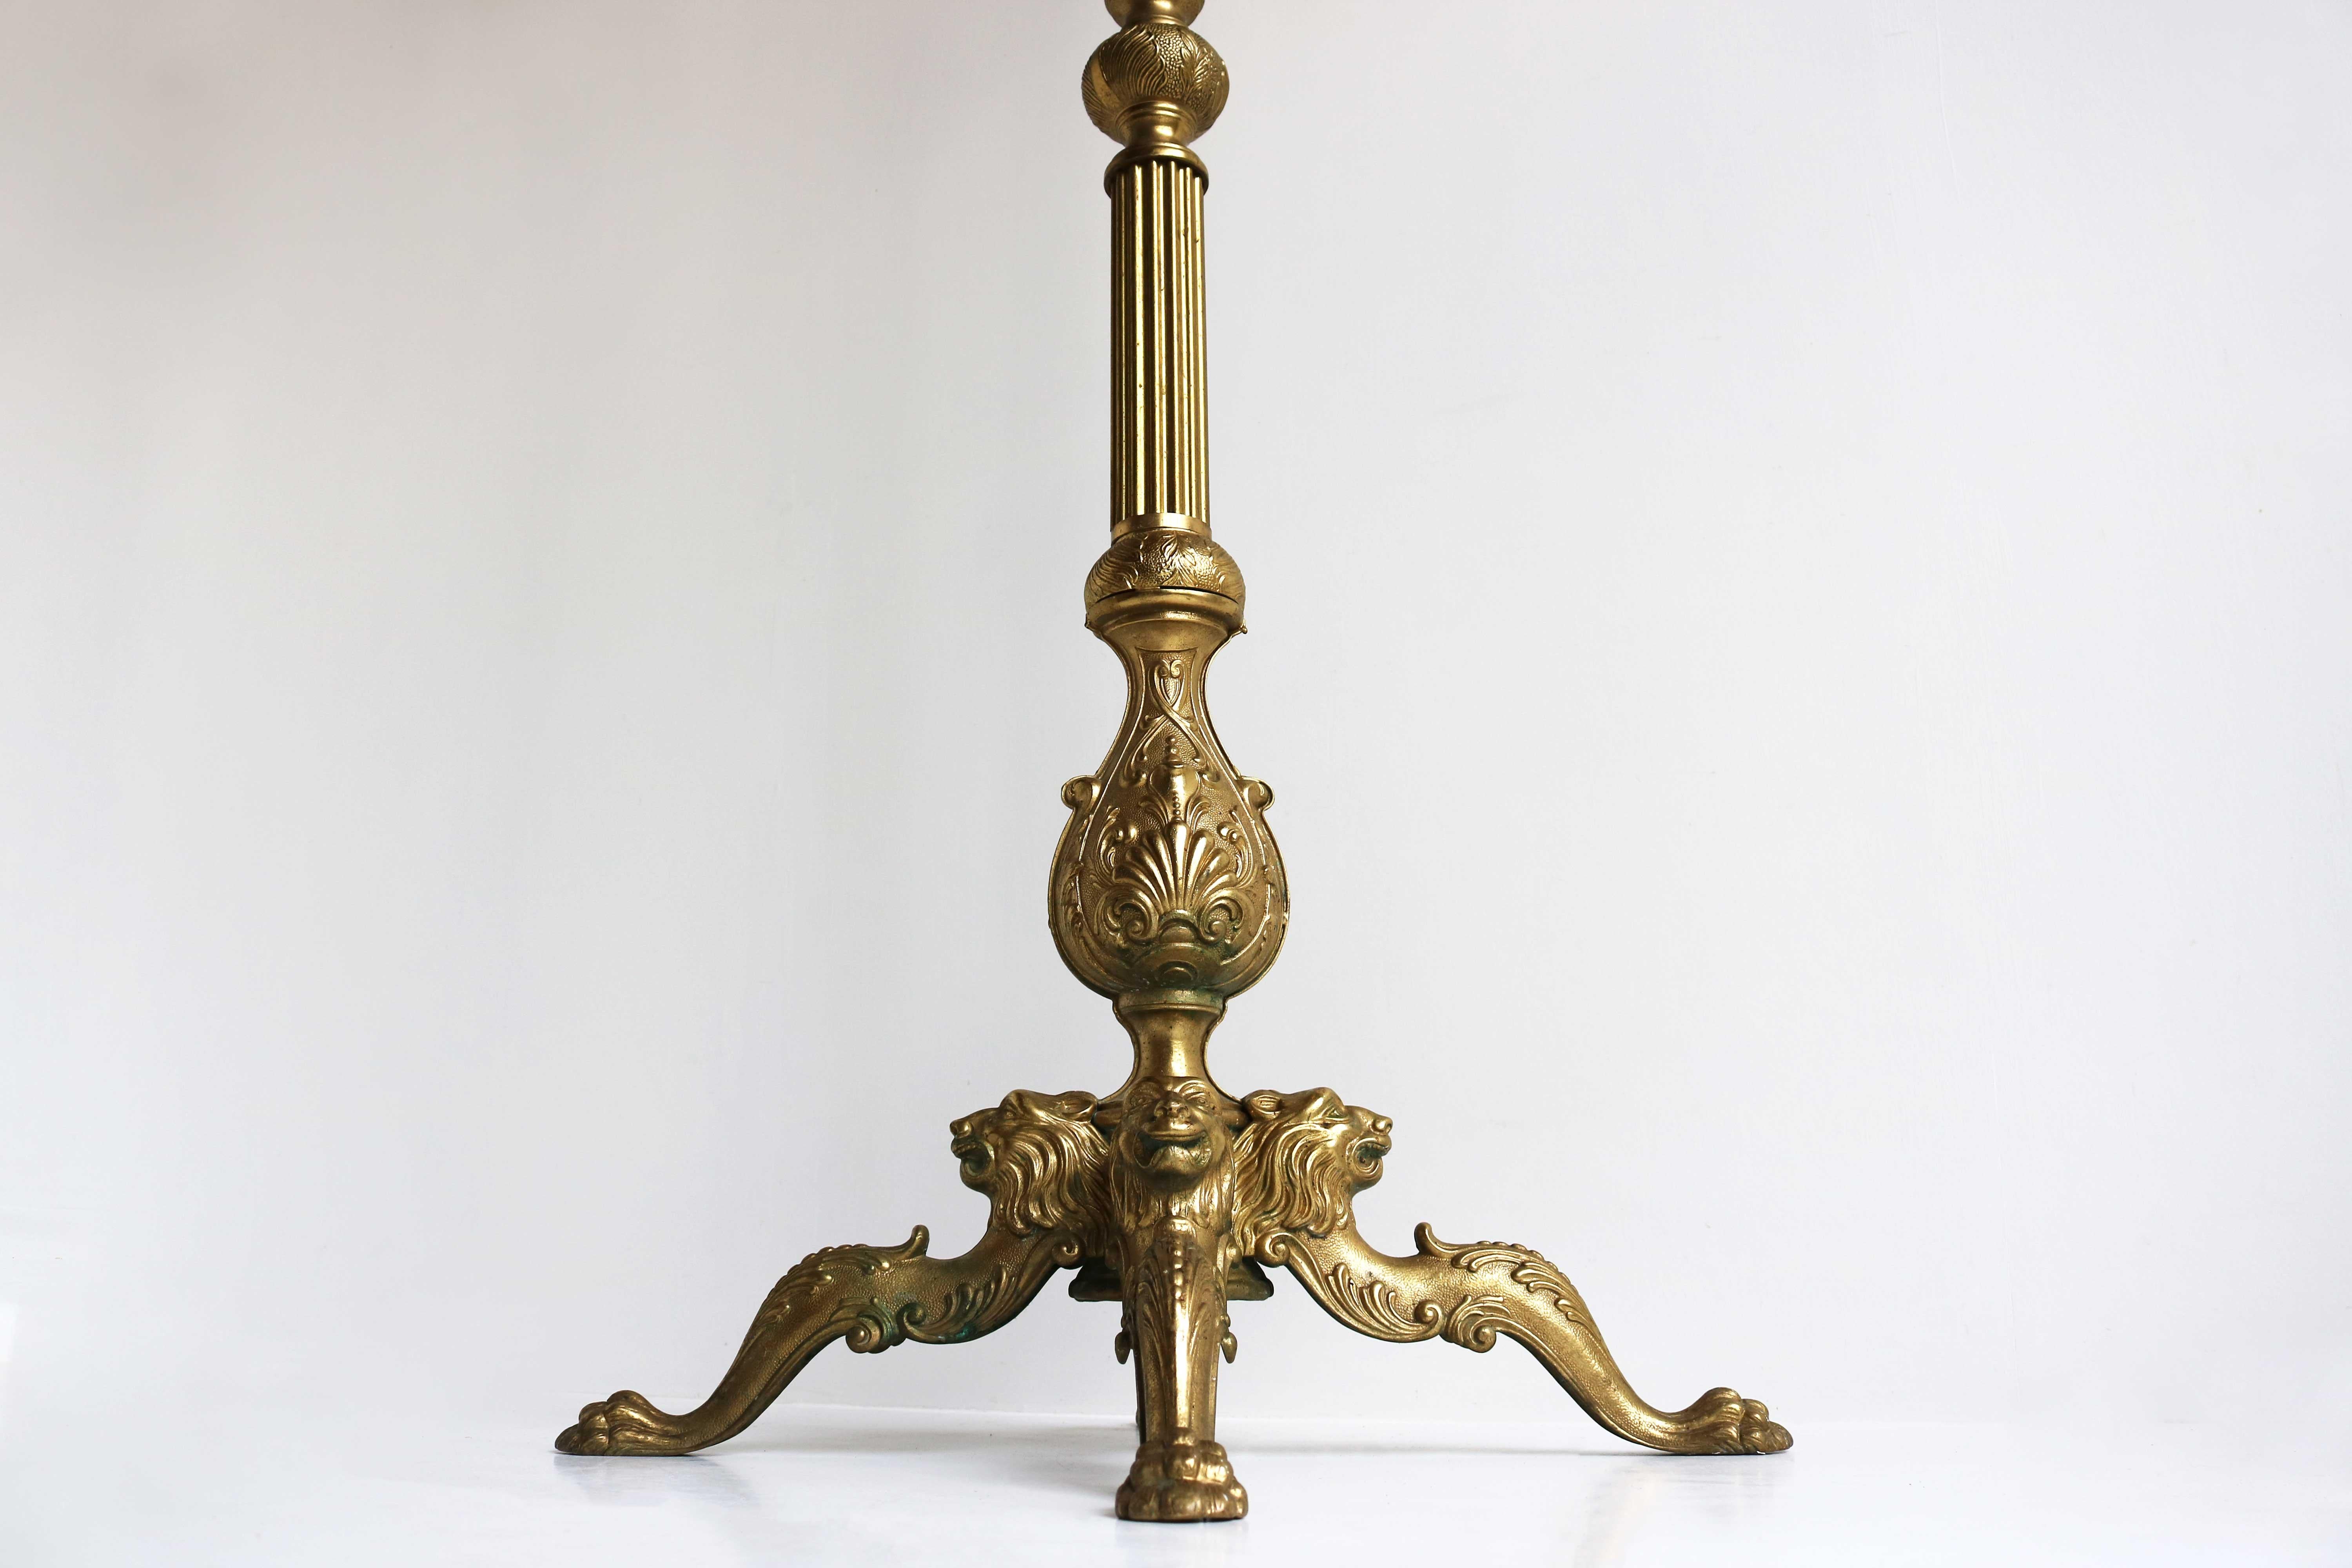 A stunning and very well made mid-century free standing Italian ornate brass coat stand from the 1960s.
With turnable crown and casted brass hooks, and four lightly curved legs are embellished with lions heads and end in the lions' paws. 
This